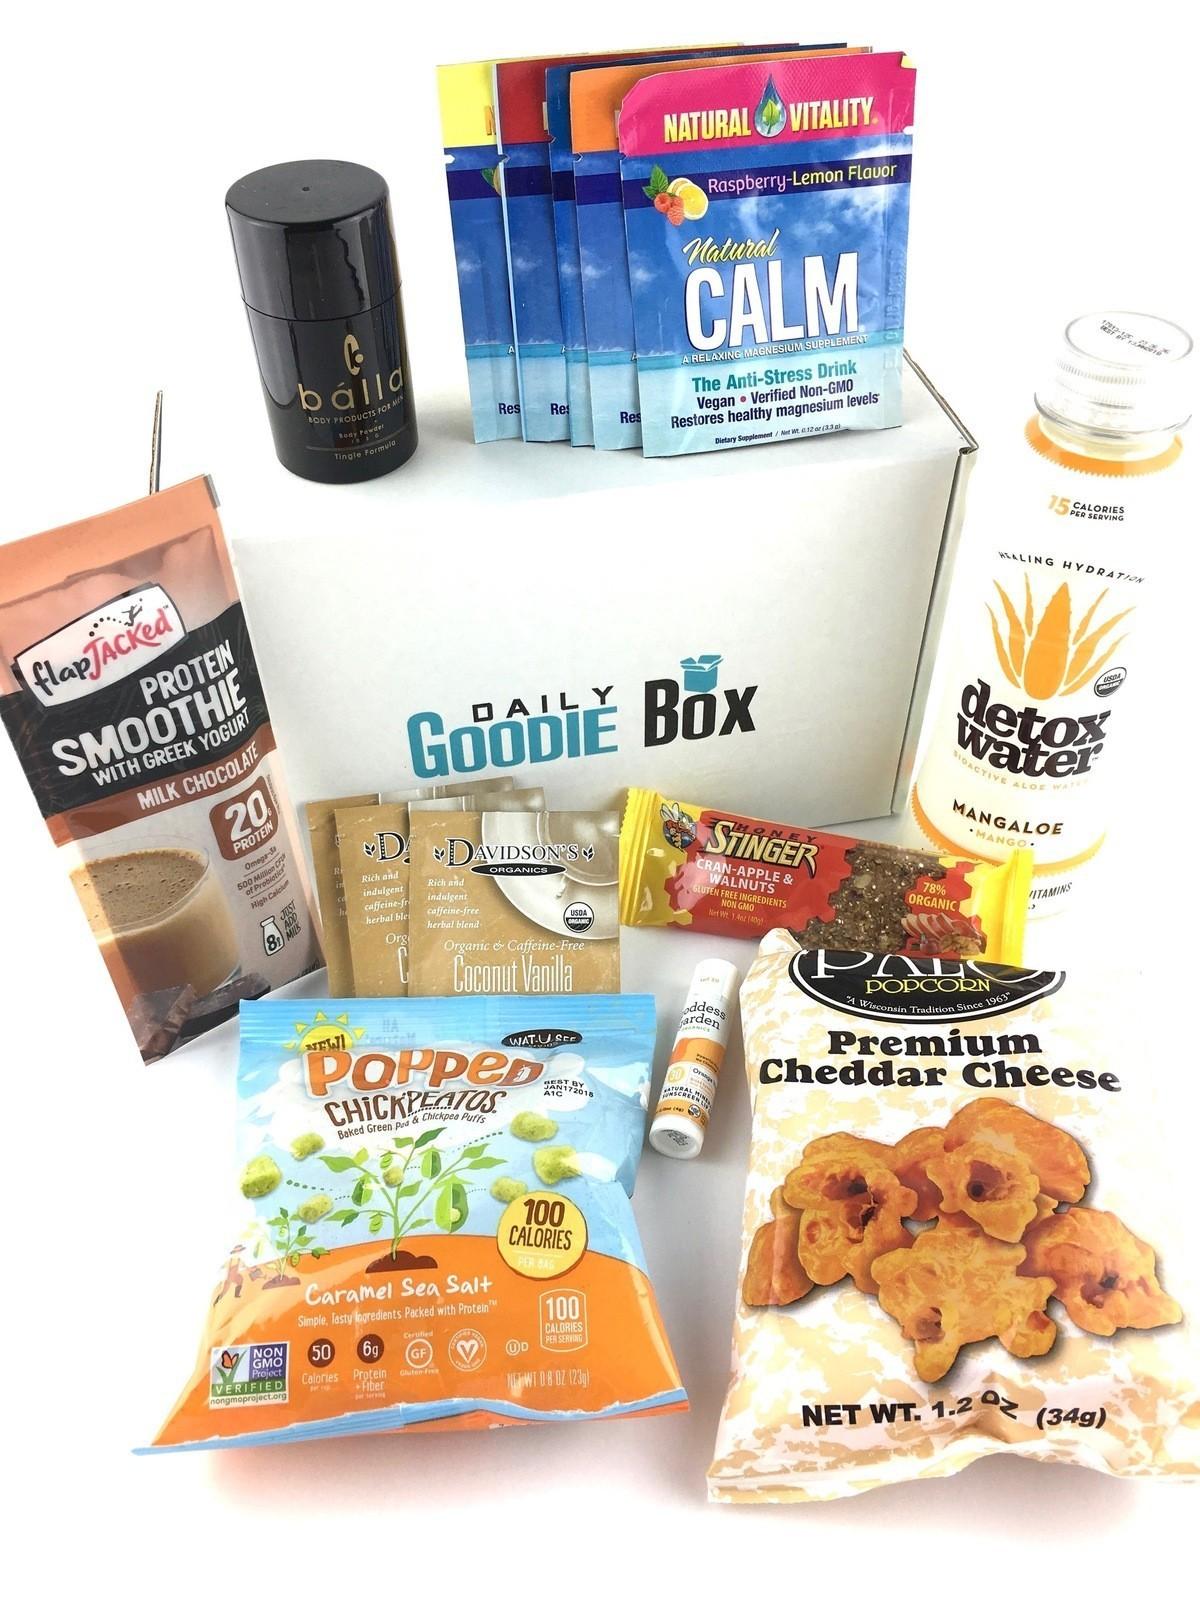 Daily Goodie Box Review – July 2017